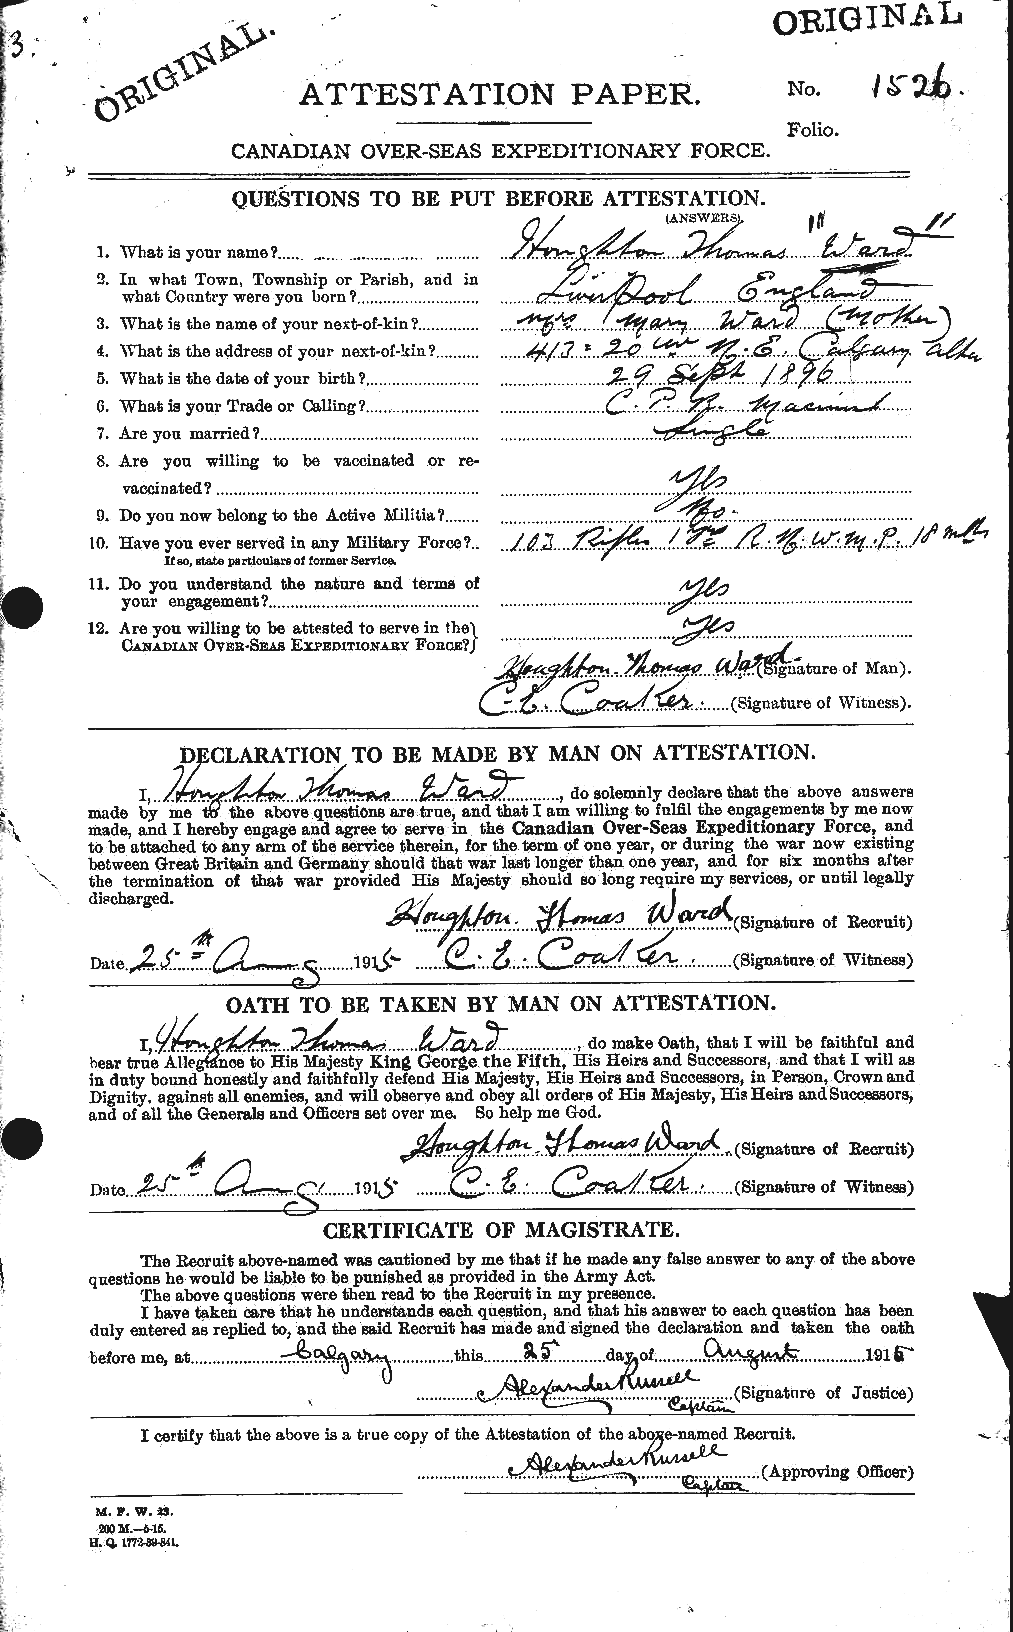 Personnel Records of the First World War - CEF 657863a